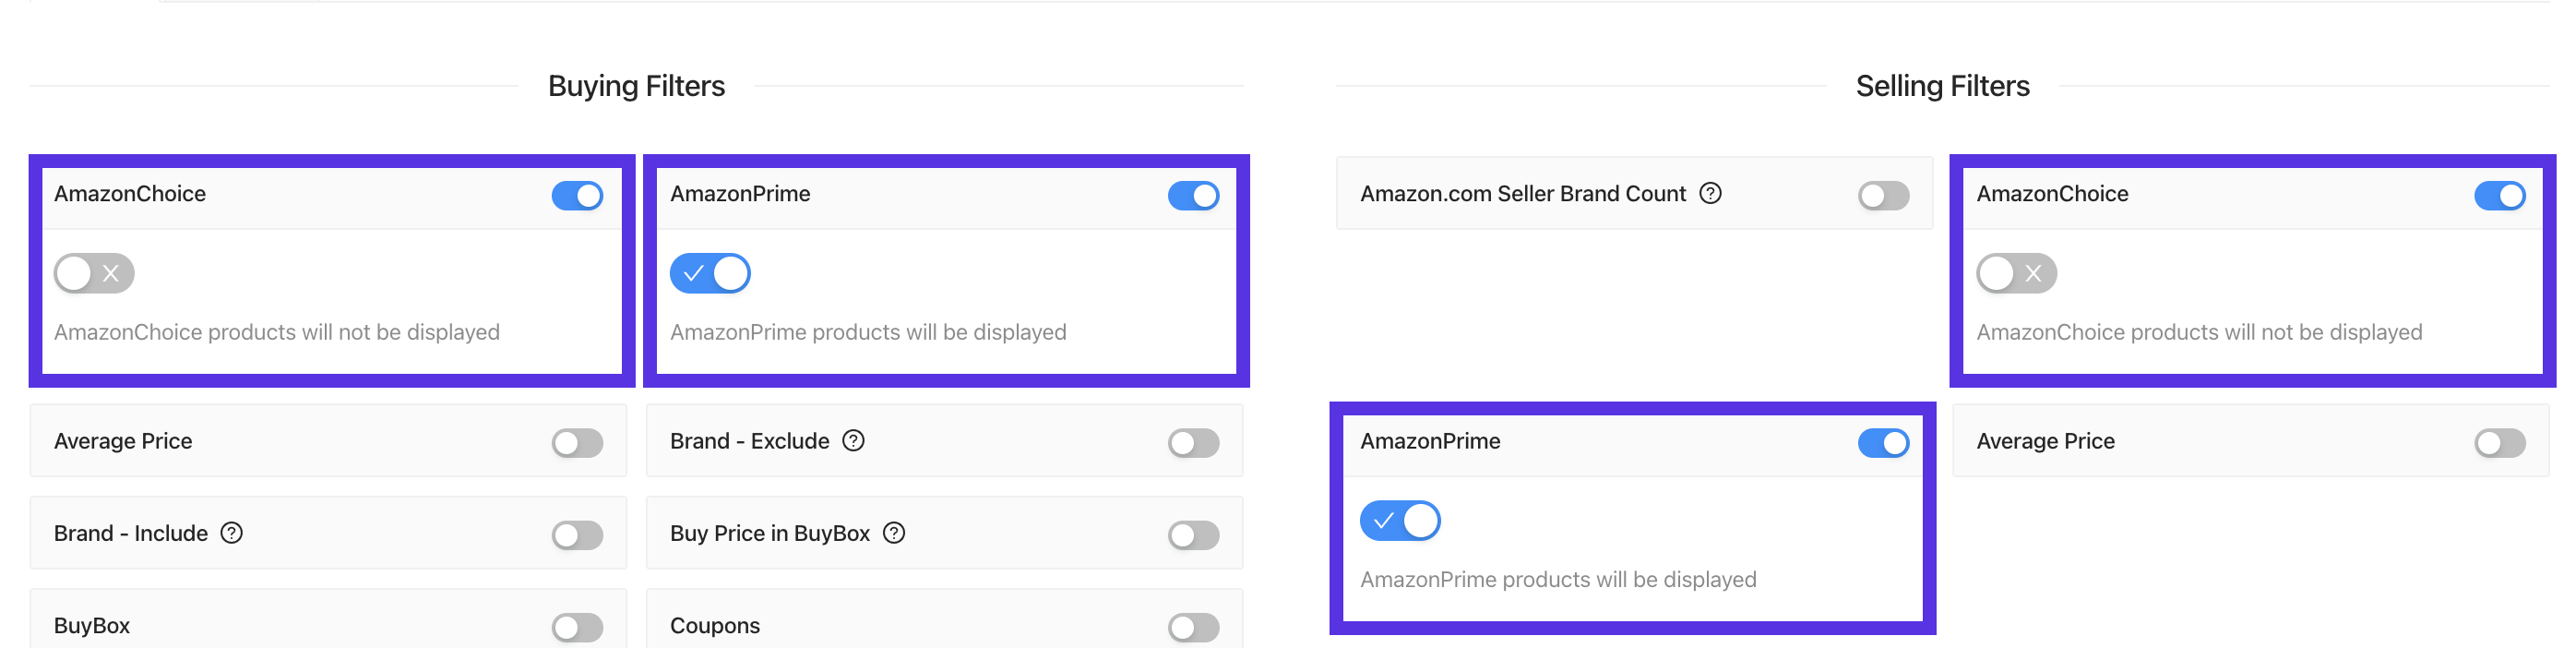 Amazon Prime and Amazon Choice Filters Supasell